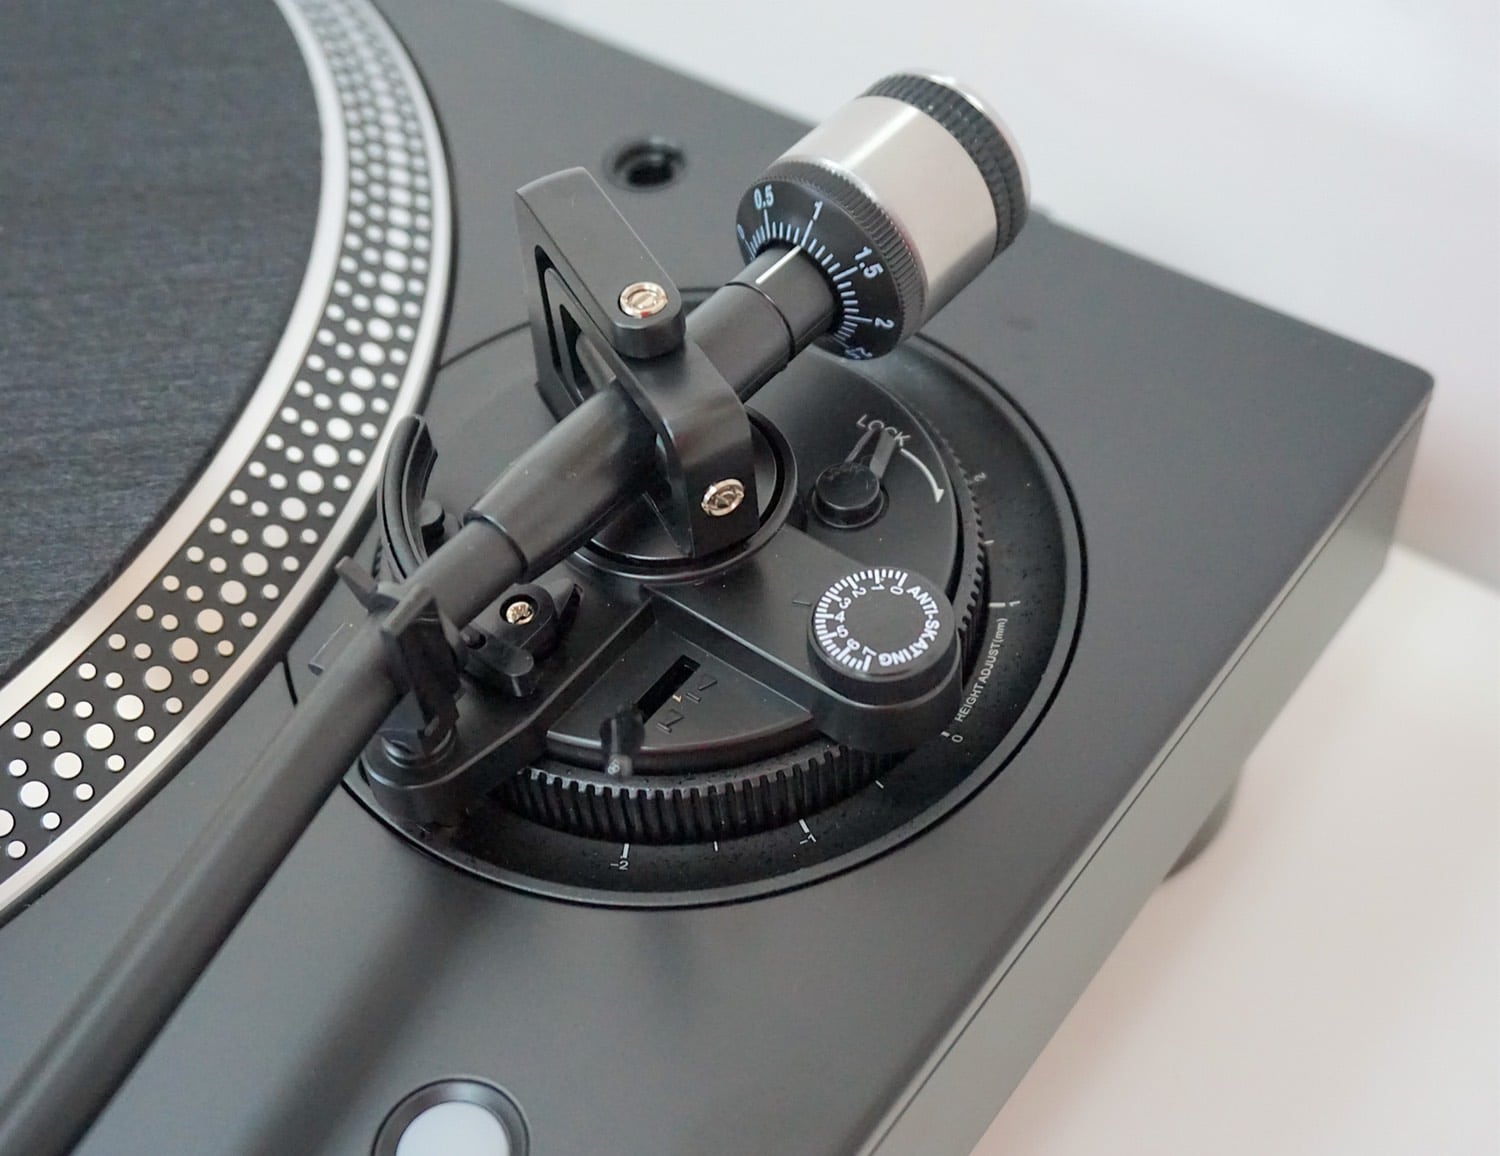 AT-LP140XP Turntable From Audio-Technica - The Audiophile Man